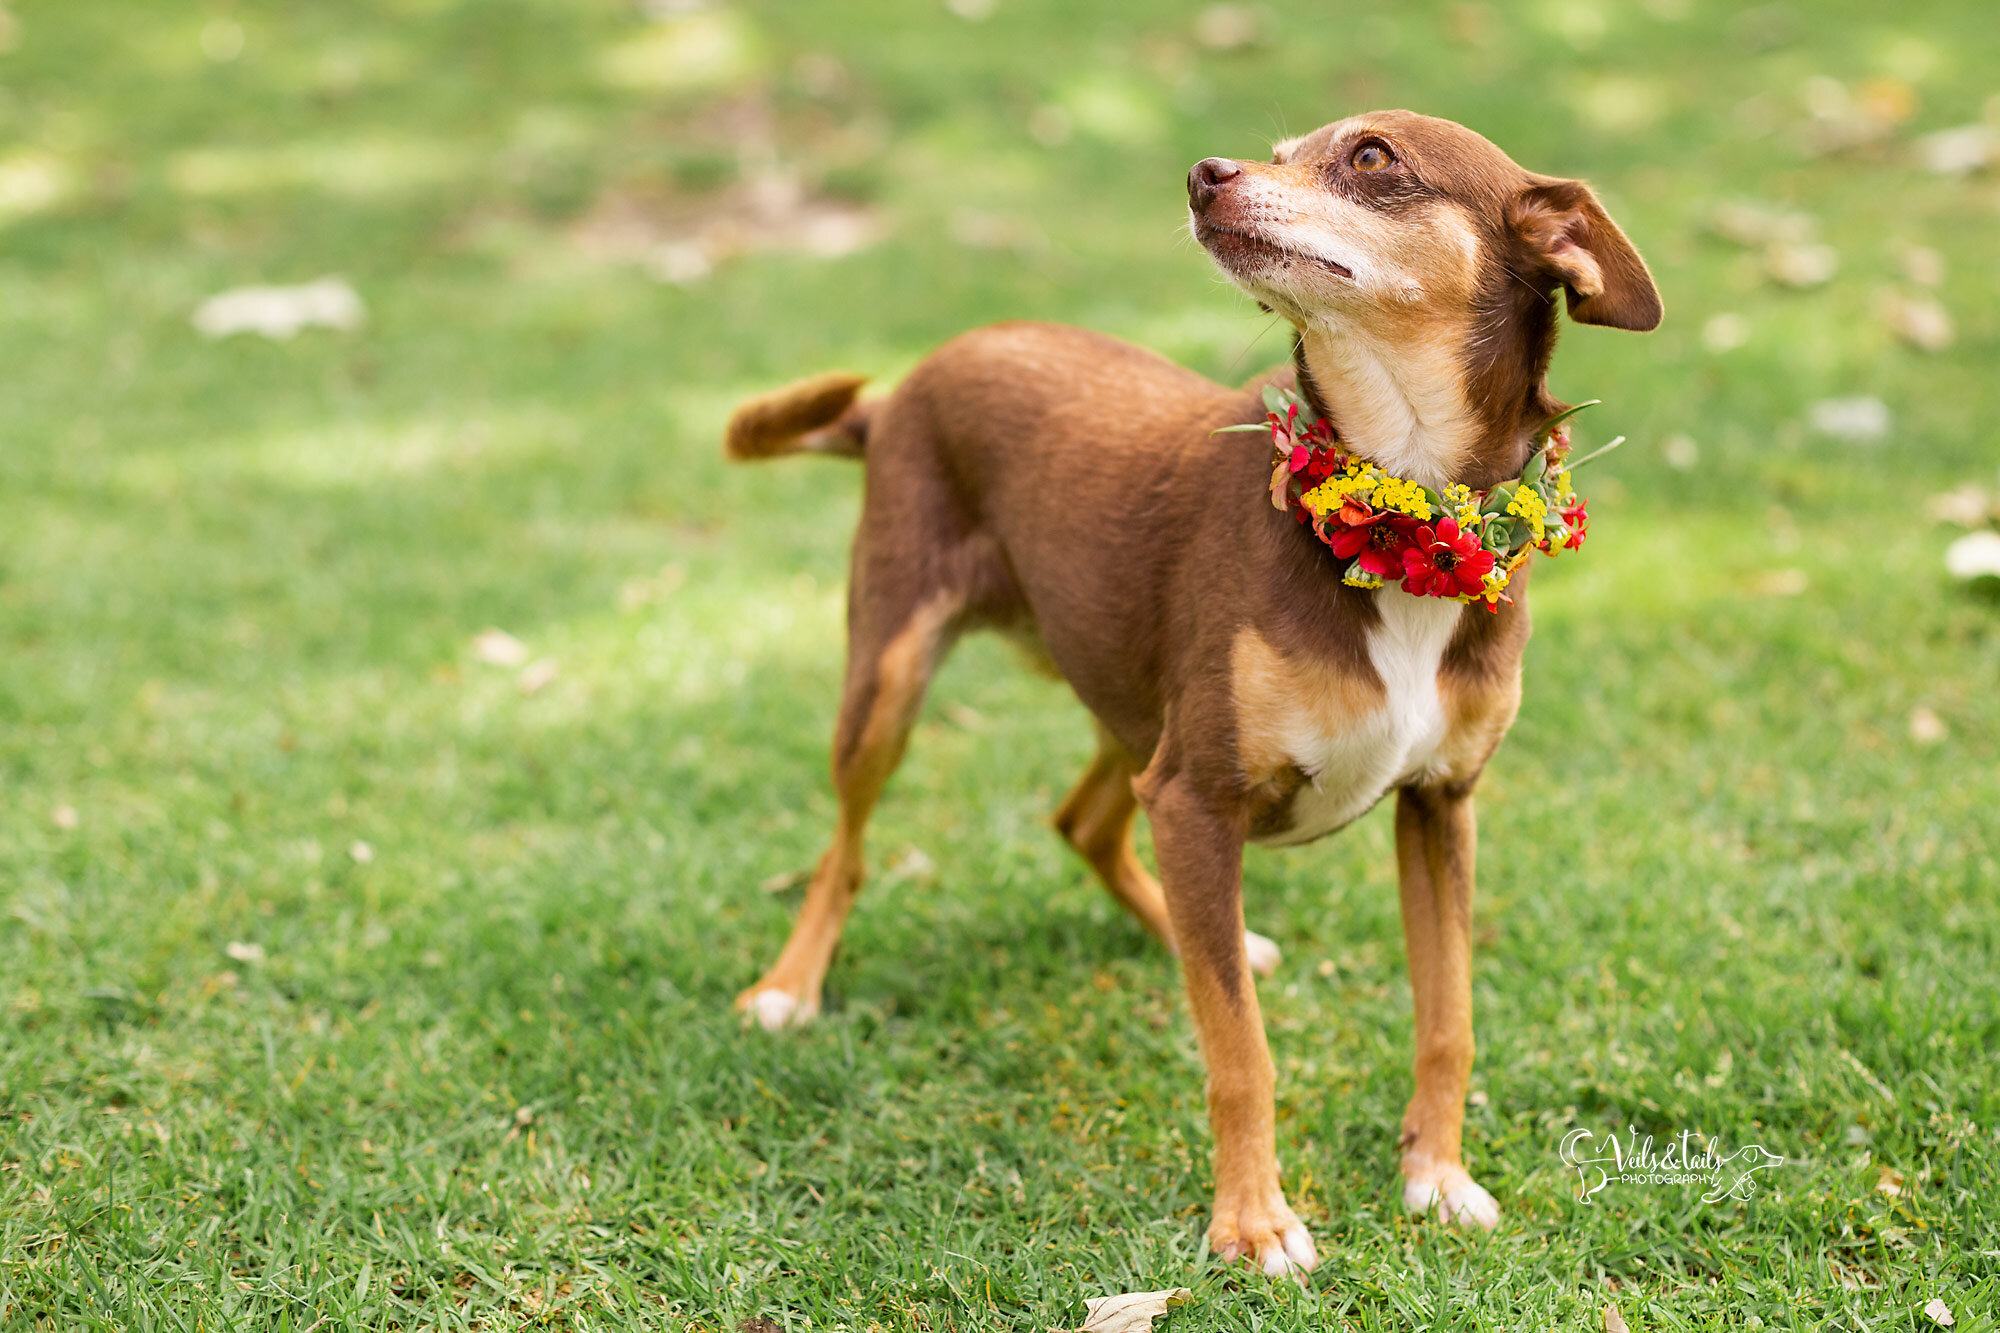 Dog in a flower collar, South Coast pet photographer